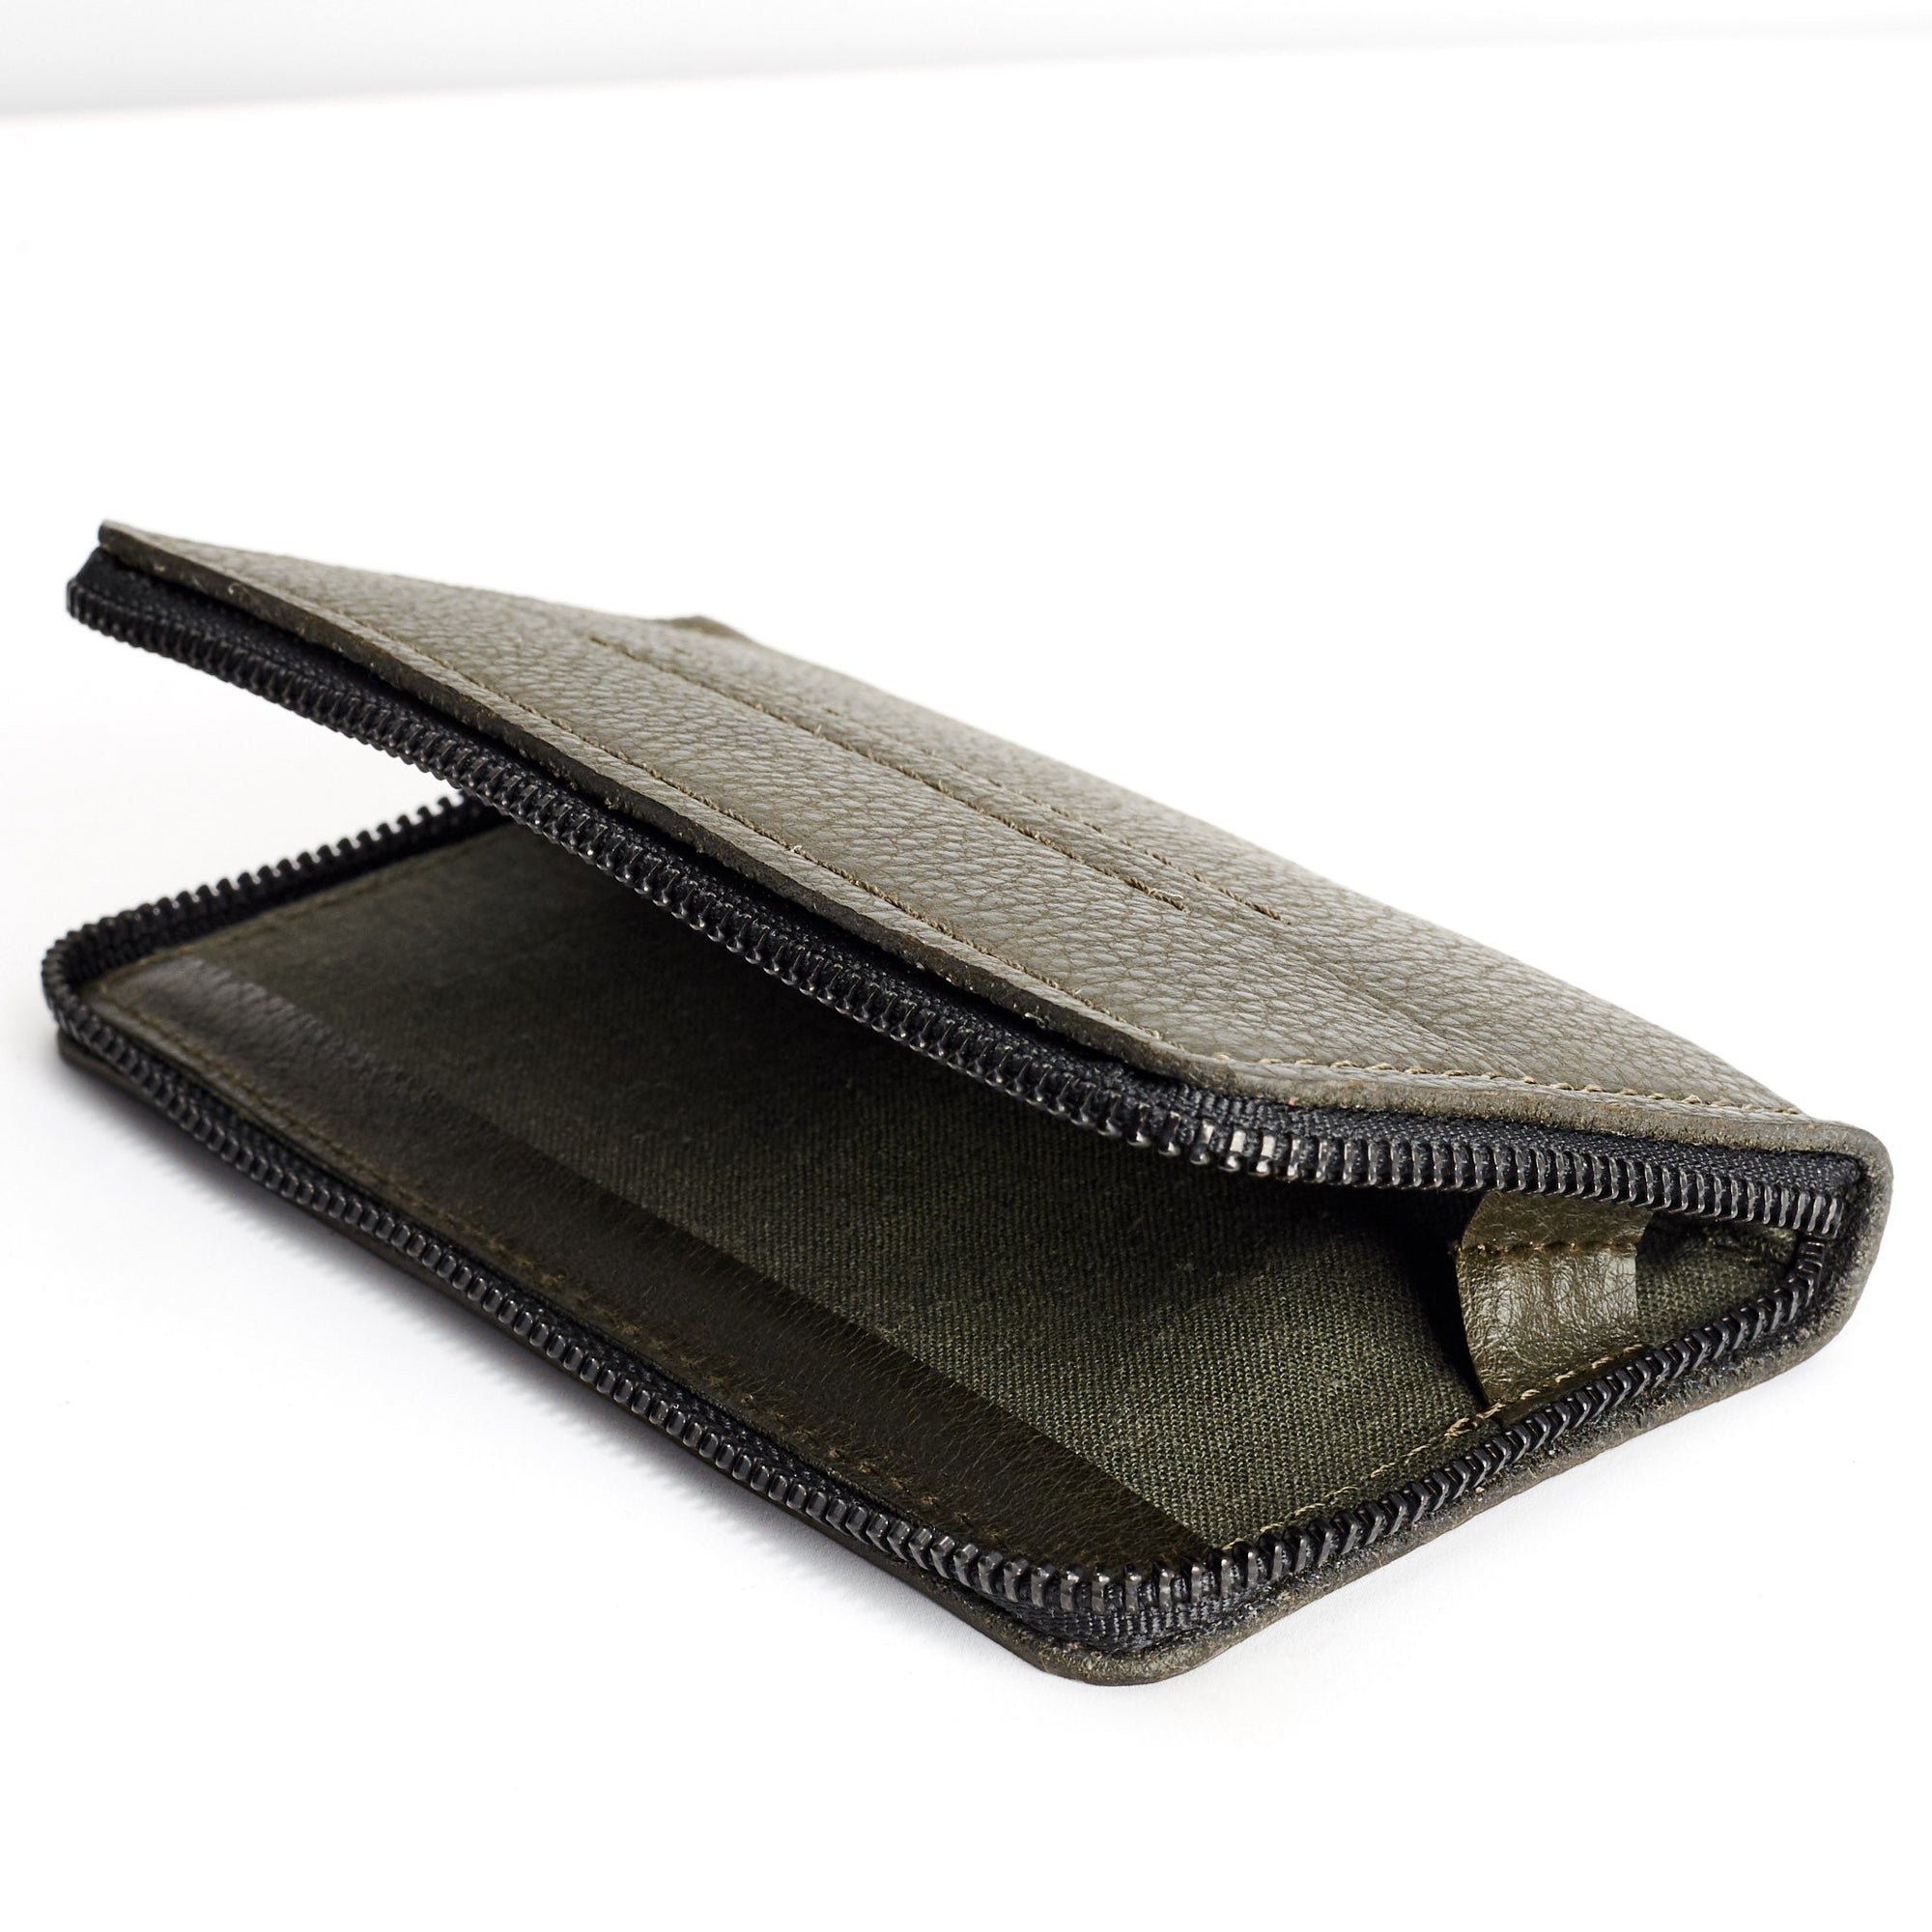 Detail linen interior. Green iPhone leather wallet stand case for mens gifts